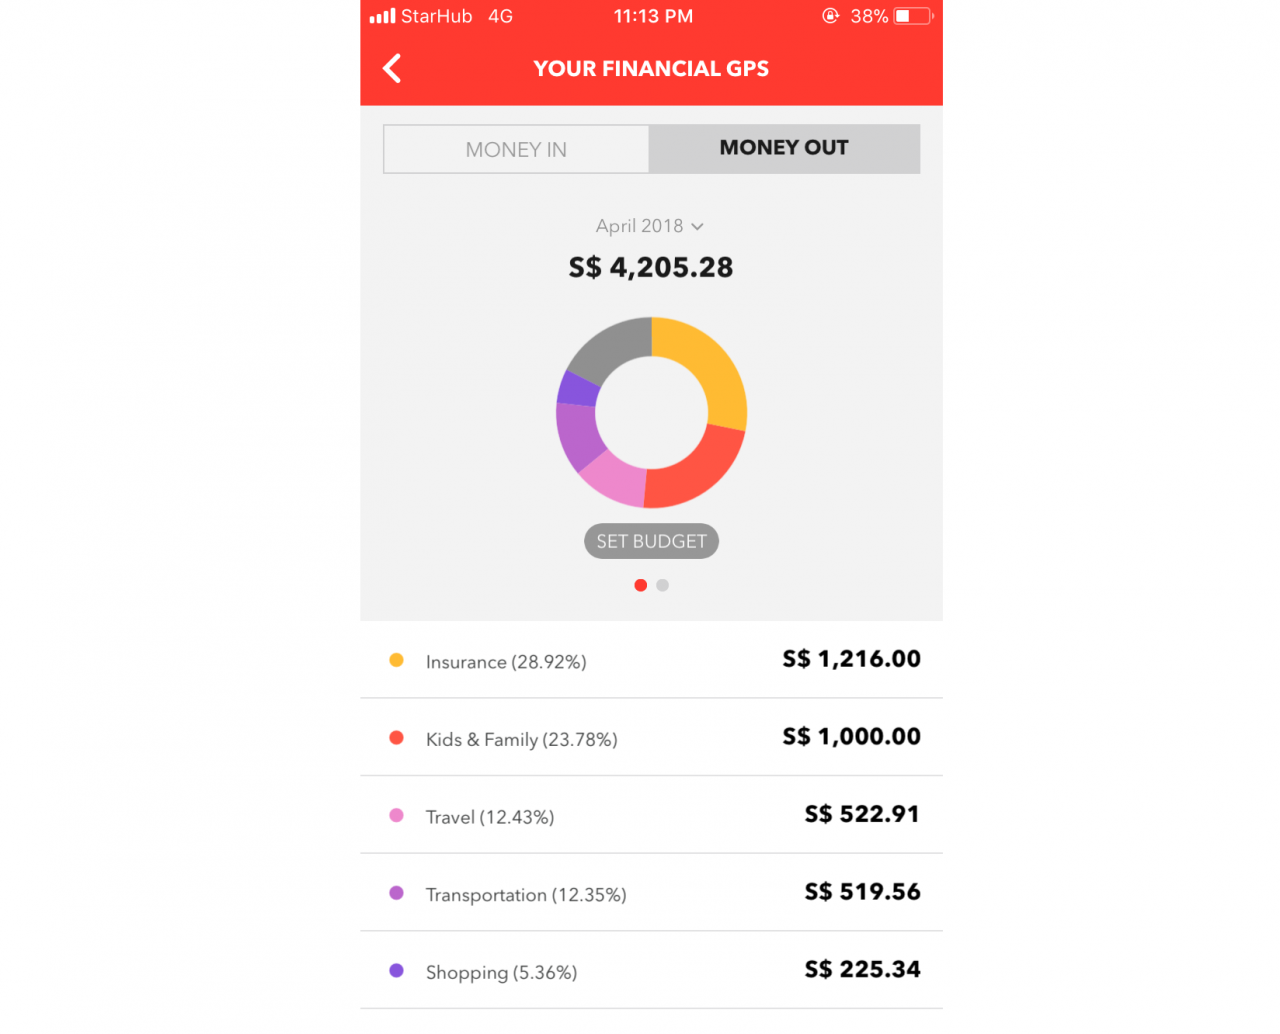 DBS NAV Hub - Your Financial GPS tracks money in and out